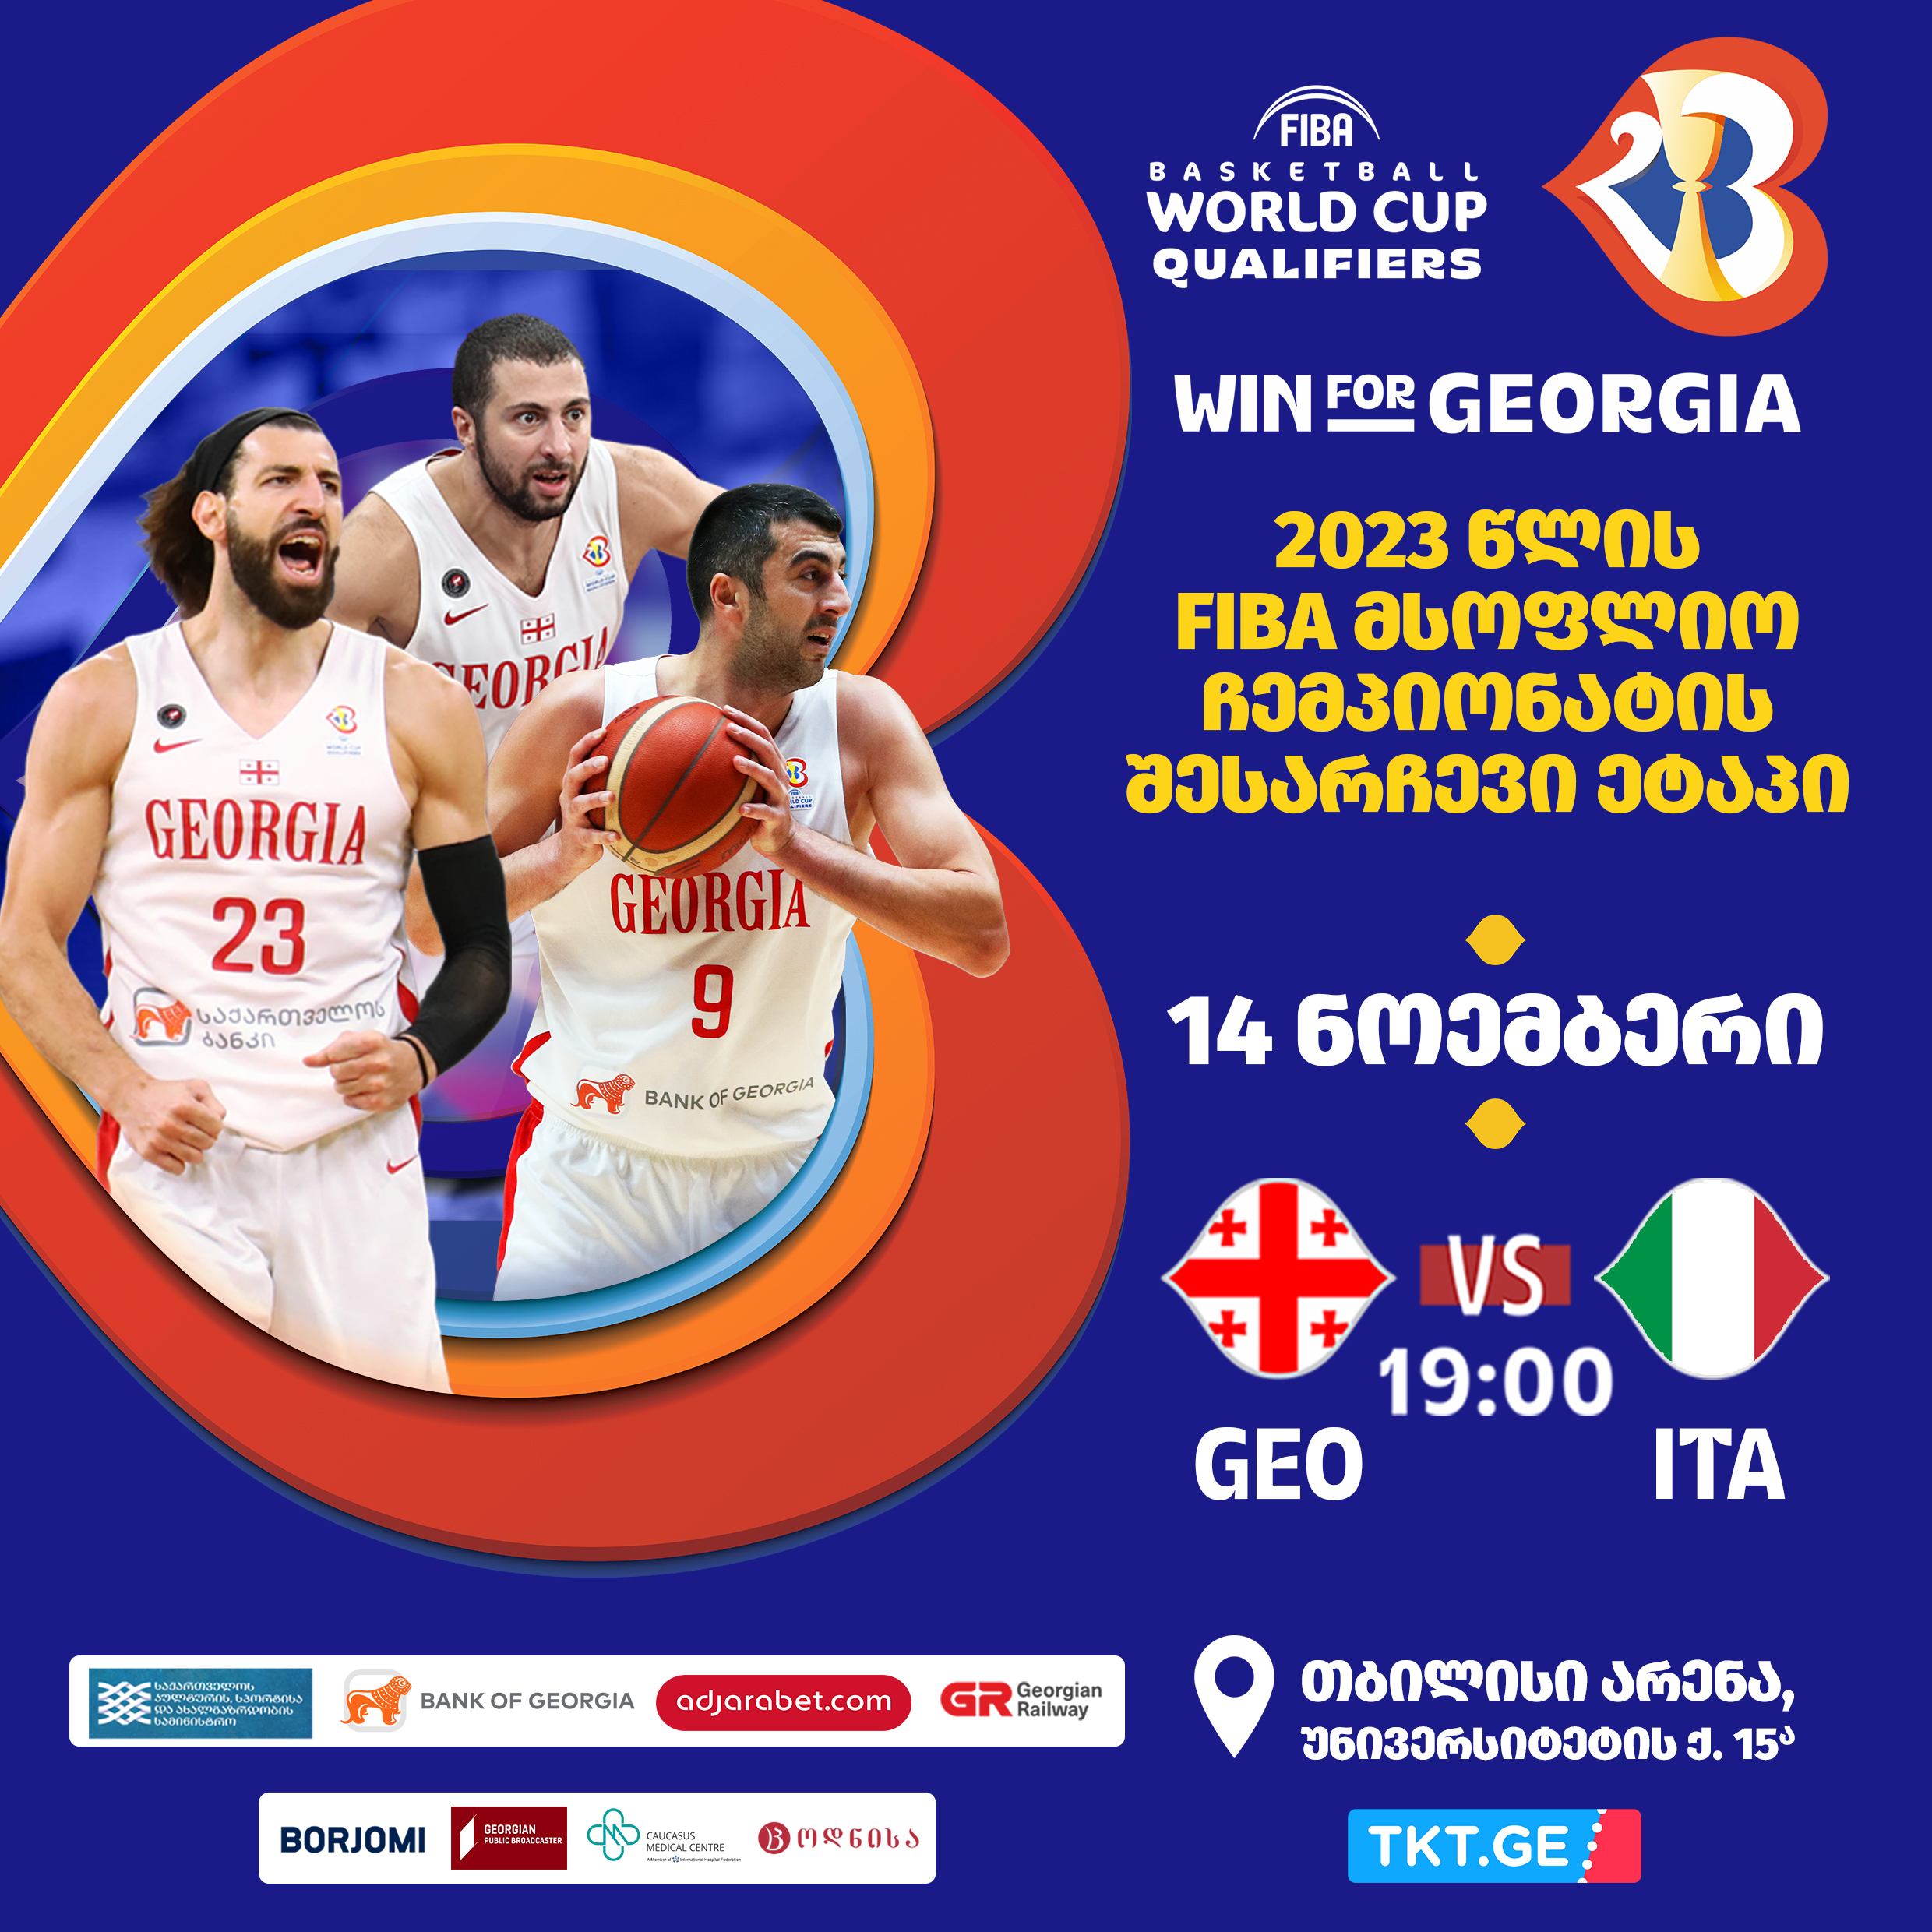 Tickets Sale for Georgia VS Italy Will Launch On November 11th